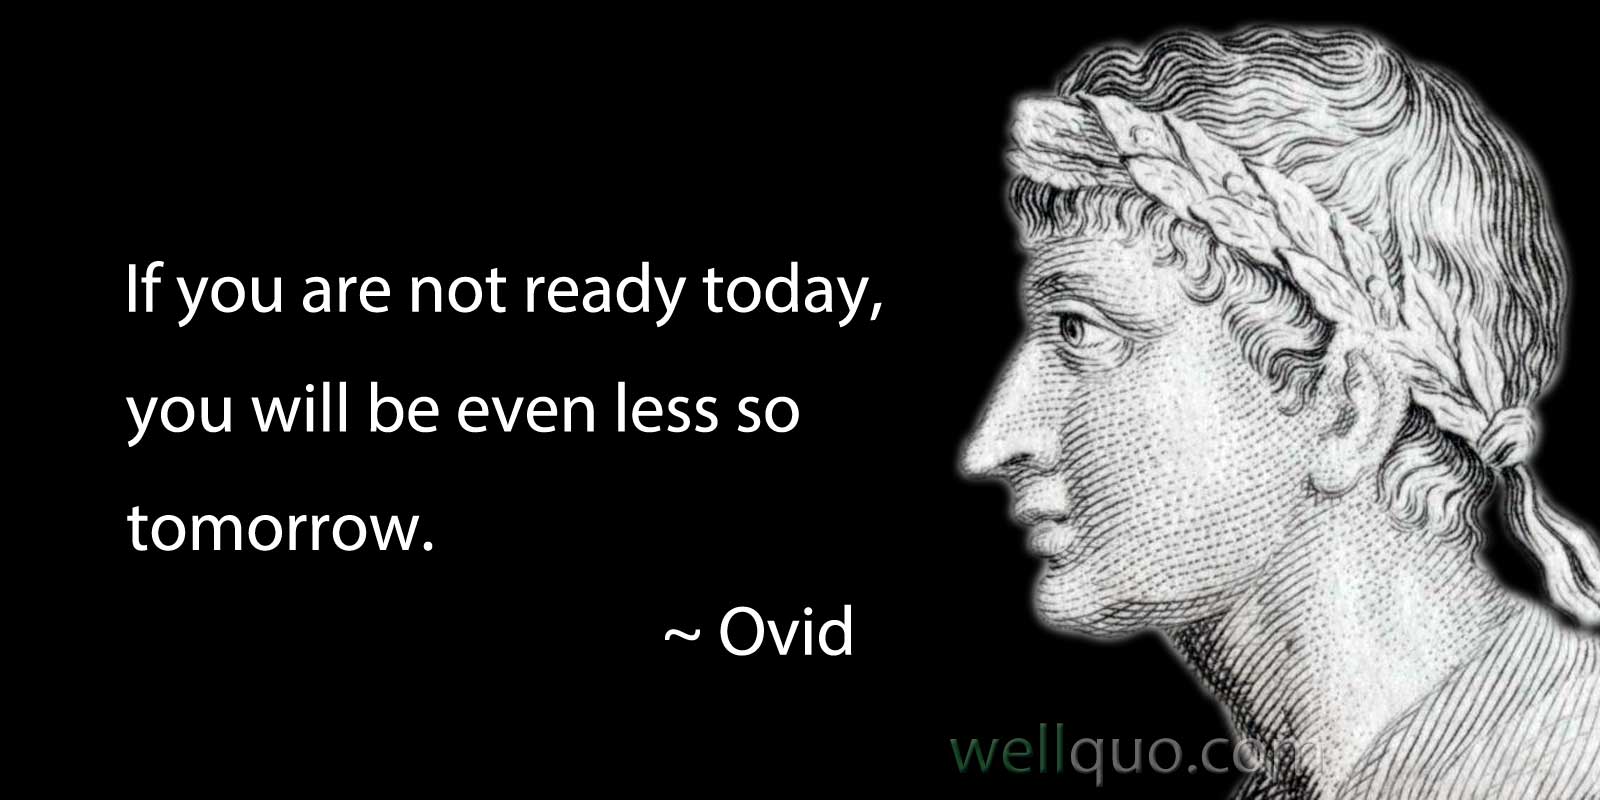 Ovid Quotes - Famous Quotes From the Roman Poet